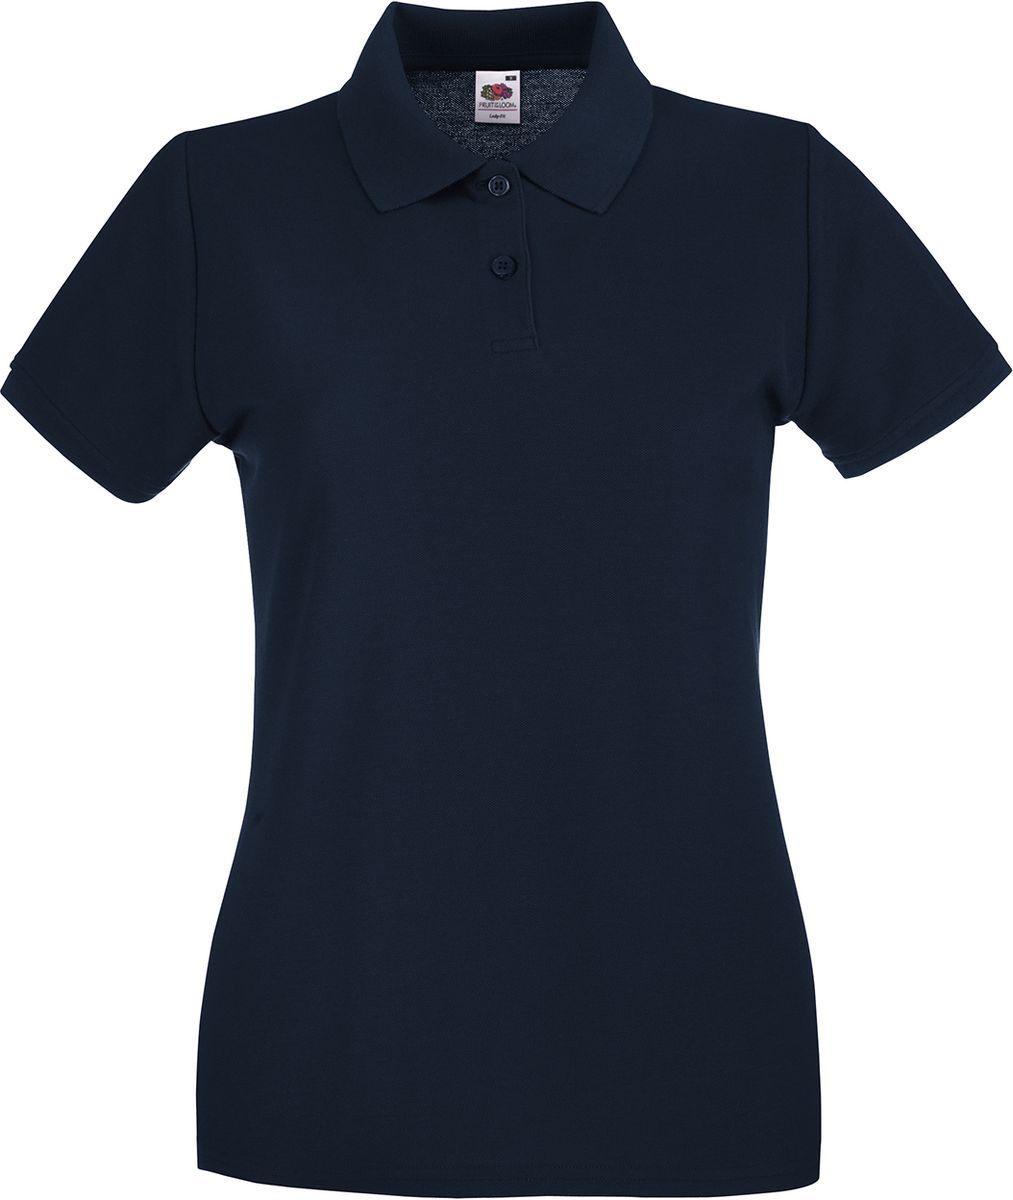 Lady-Fit Premium Polo Fruit of the Loom 63-030-0 Deep Navy